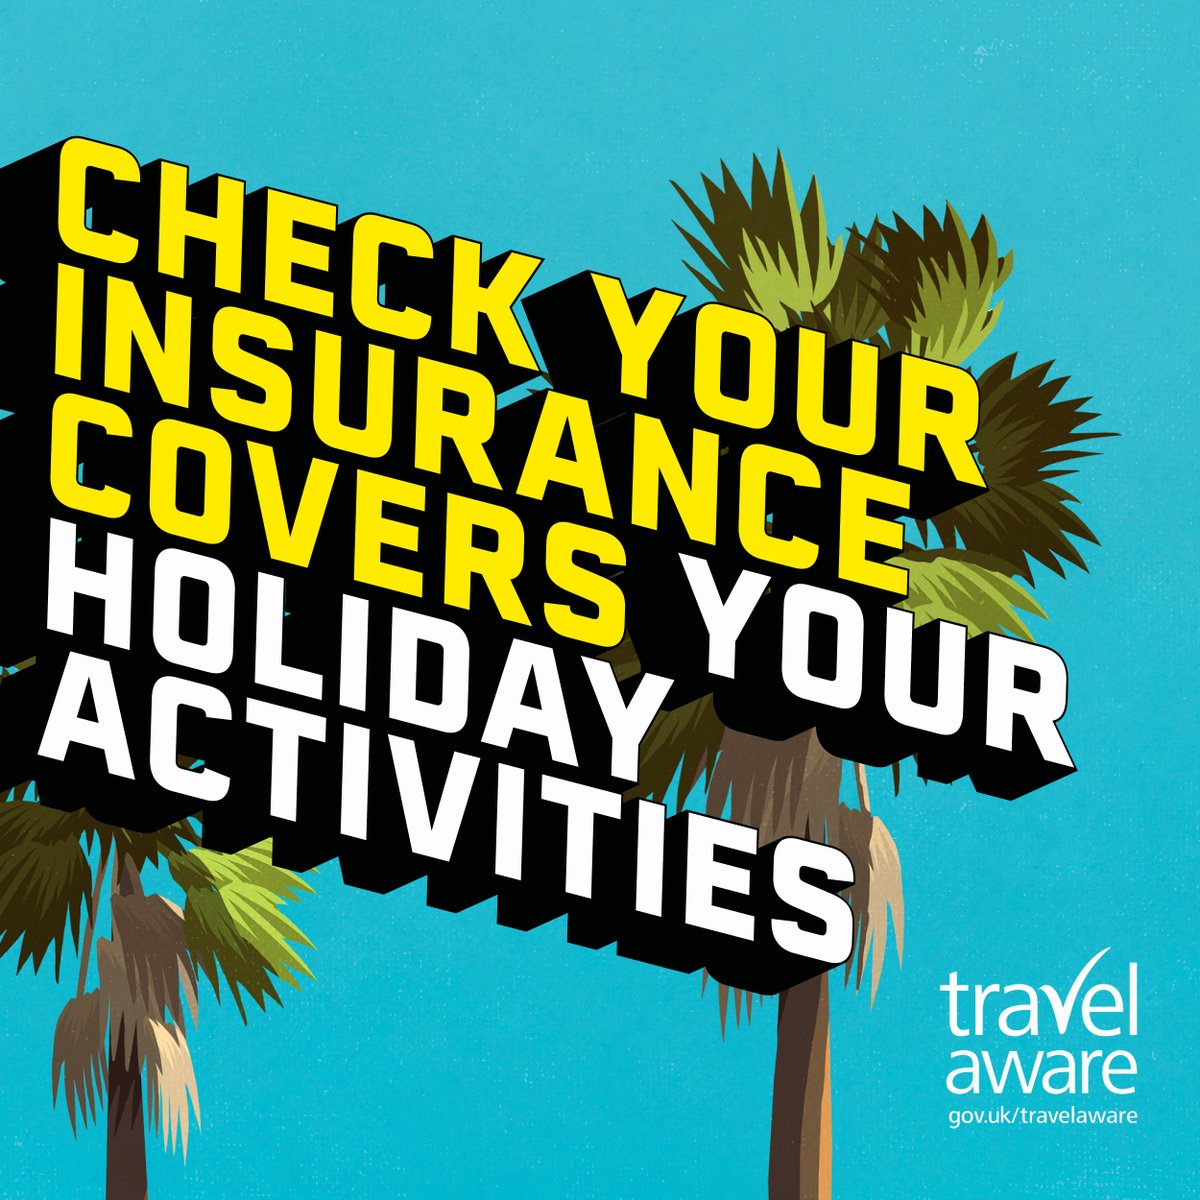 Preparing for a trip abroad this April? 

Make sure travel insurance is top of your to-do list:

✅ Covers the full duration of your trip
✅ Includes all activities you plan to do 
✅ Your medical conditions are declared

ow.ly/La4K50R8w5N

#TravelAware